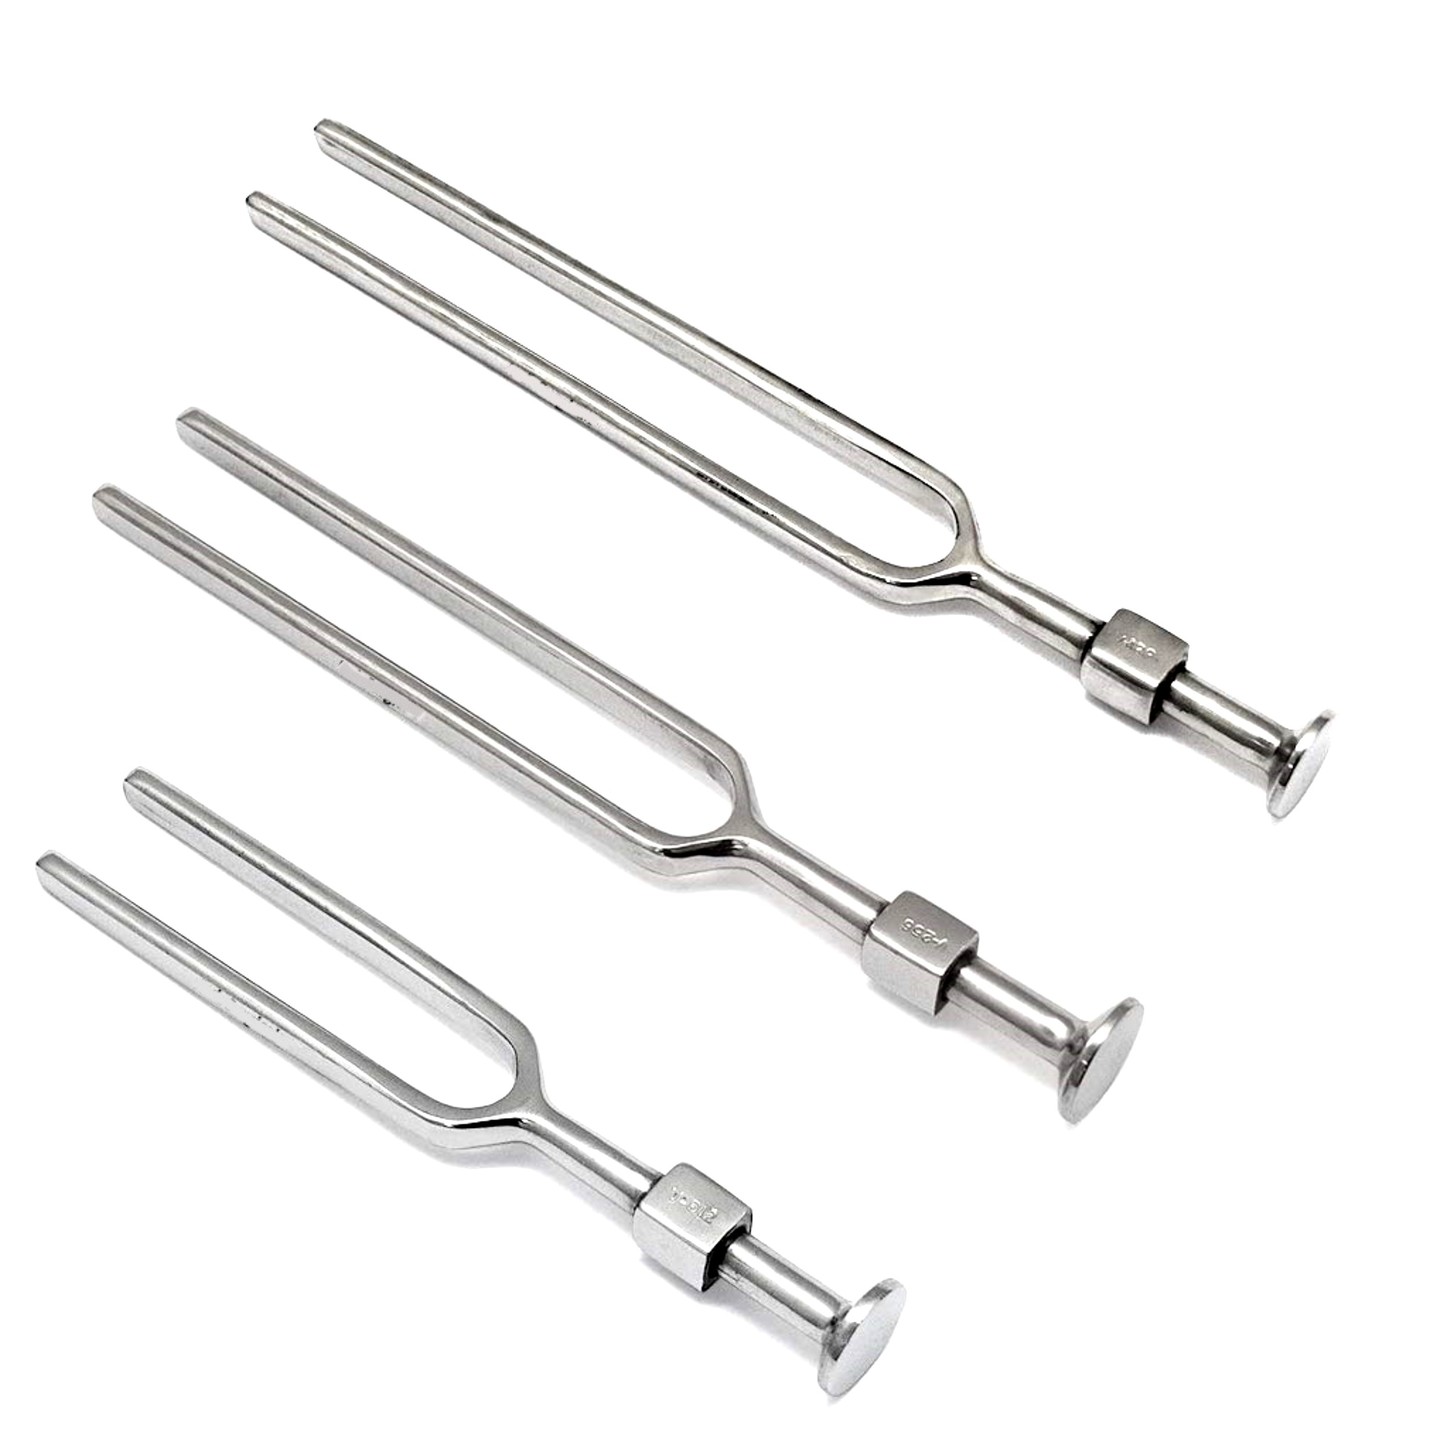 Vkare Stainless Steel Tuning Fork -  Set of 3 (128, 256, 512 MHz)